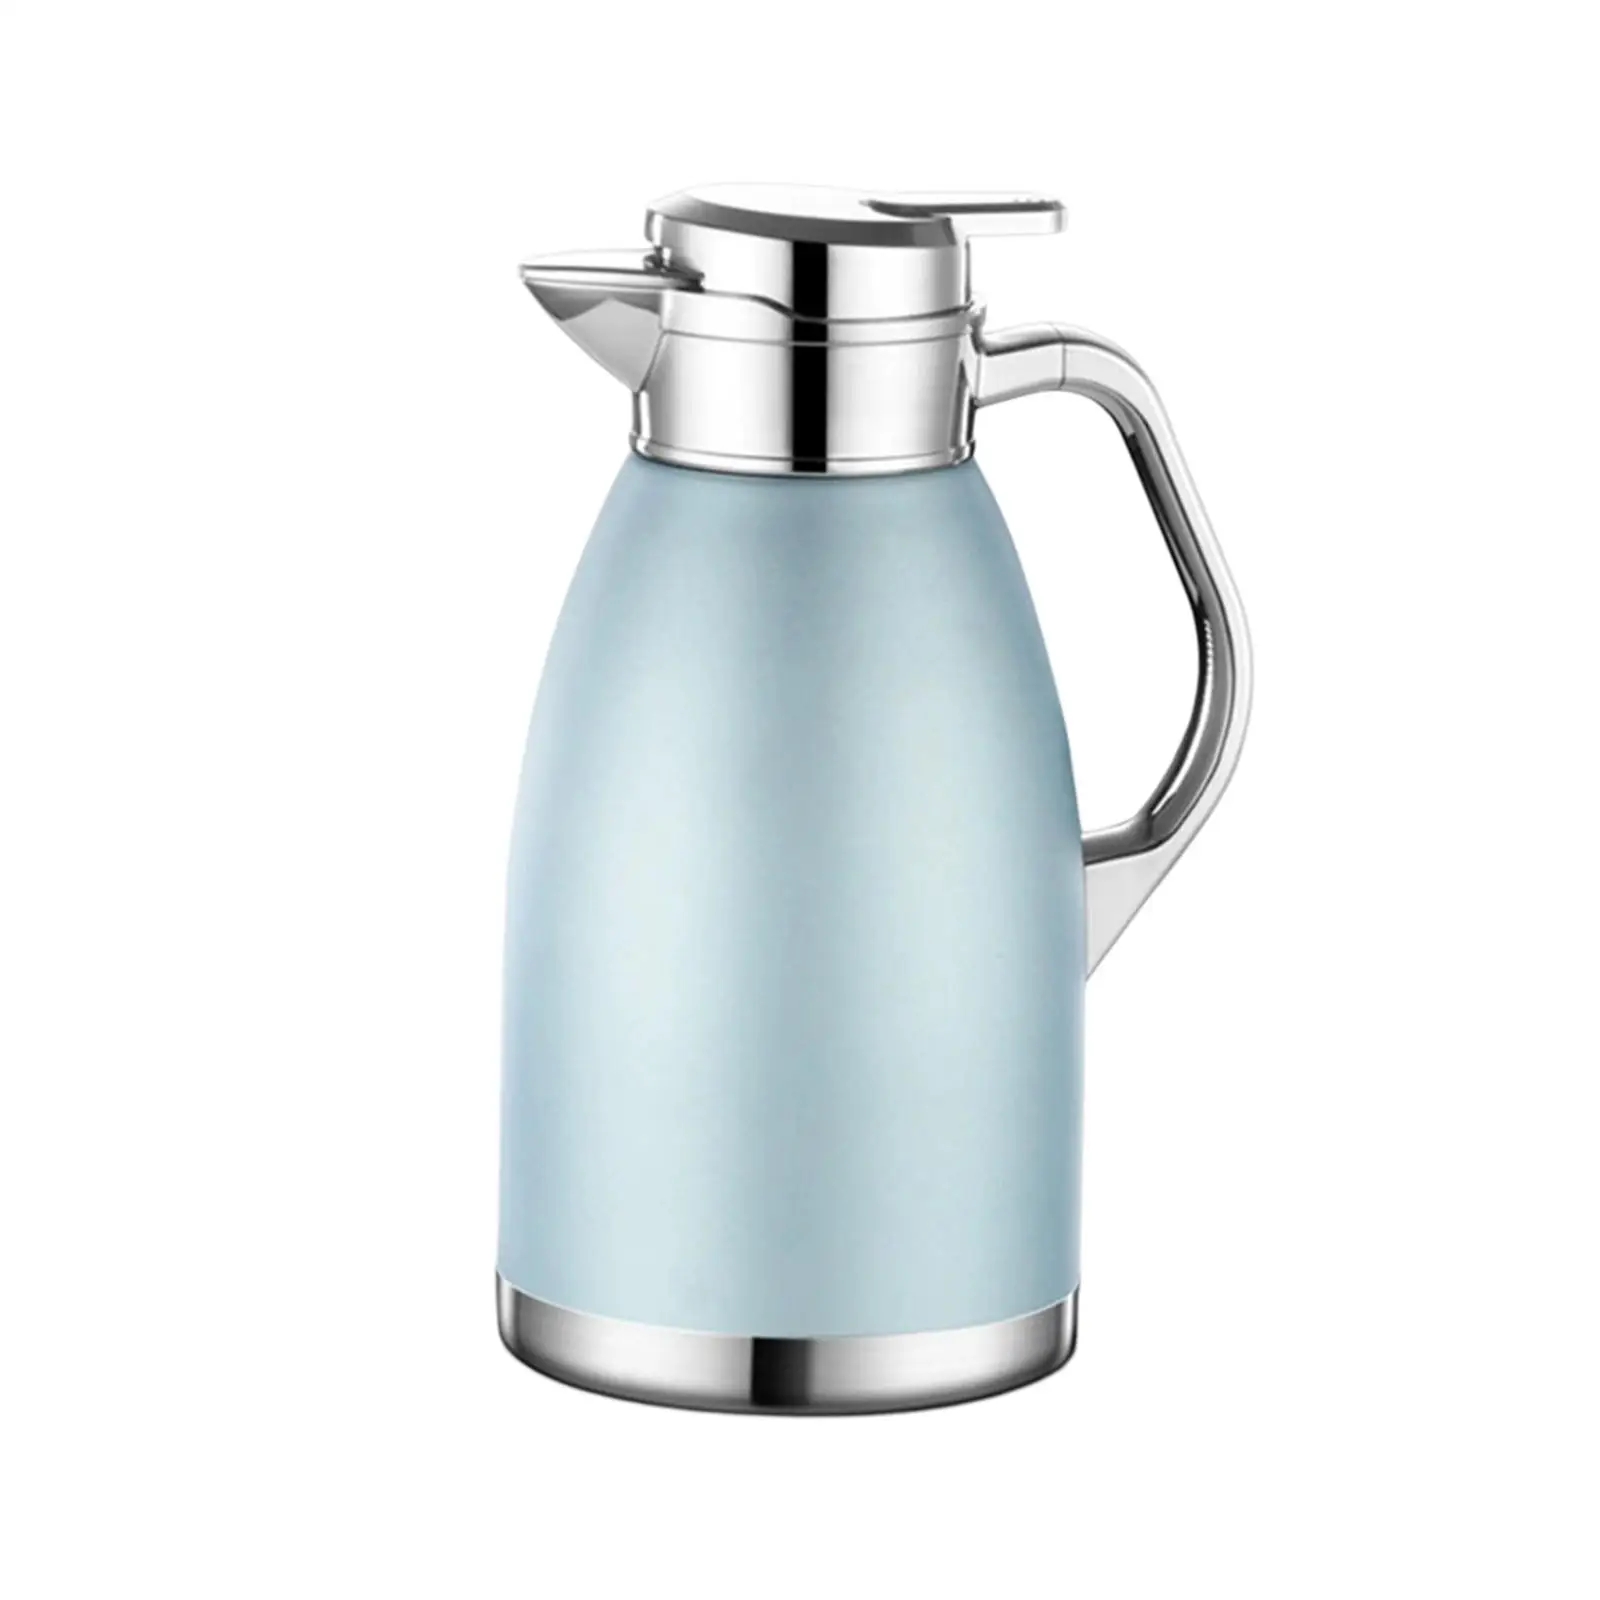 Stainless Steel Thermal Insulated Kettle Thermal Beverage Dispenser Coffee Tea Pot Vacuum Jar Dispenser Pot for Cafe Water Tea